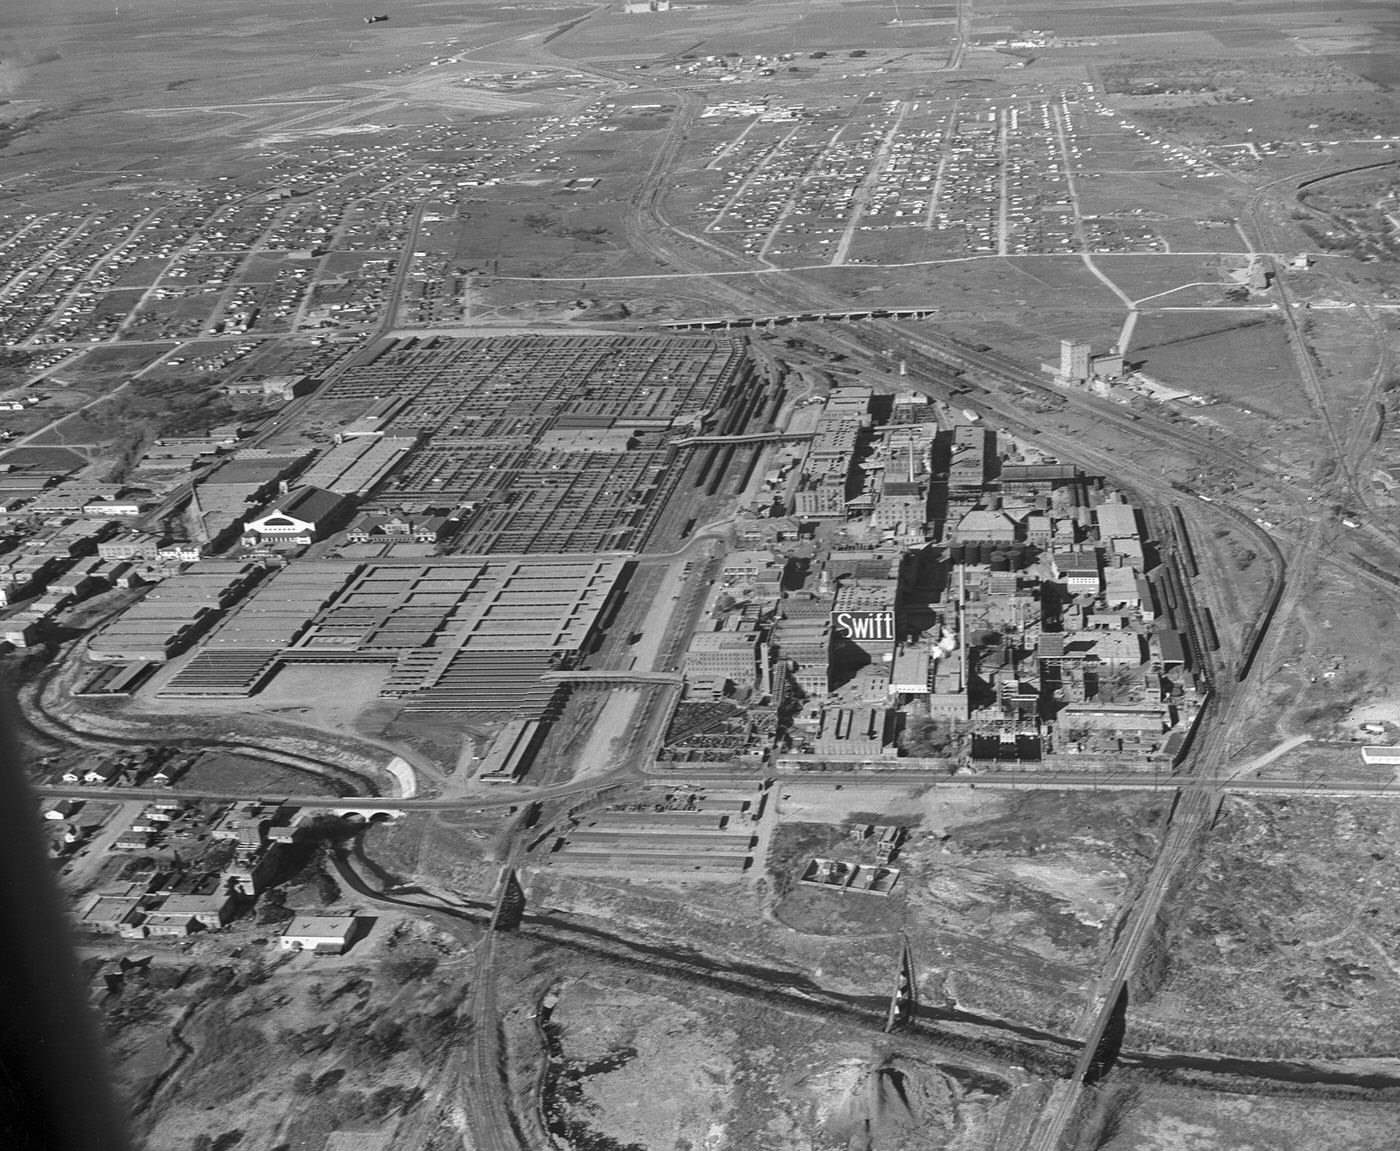 An aerial view of Fort Worth stockyards and Swift meat packing company, 1945